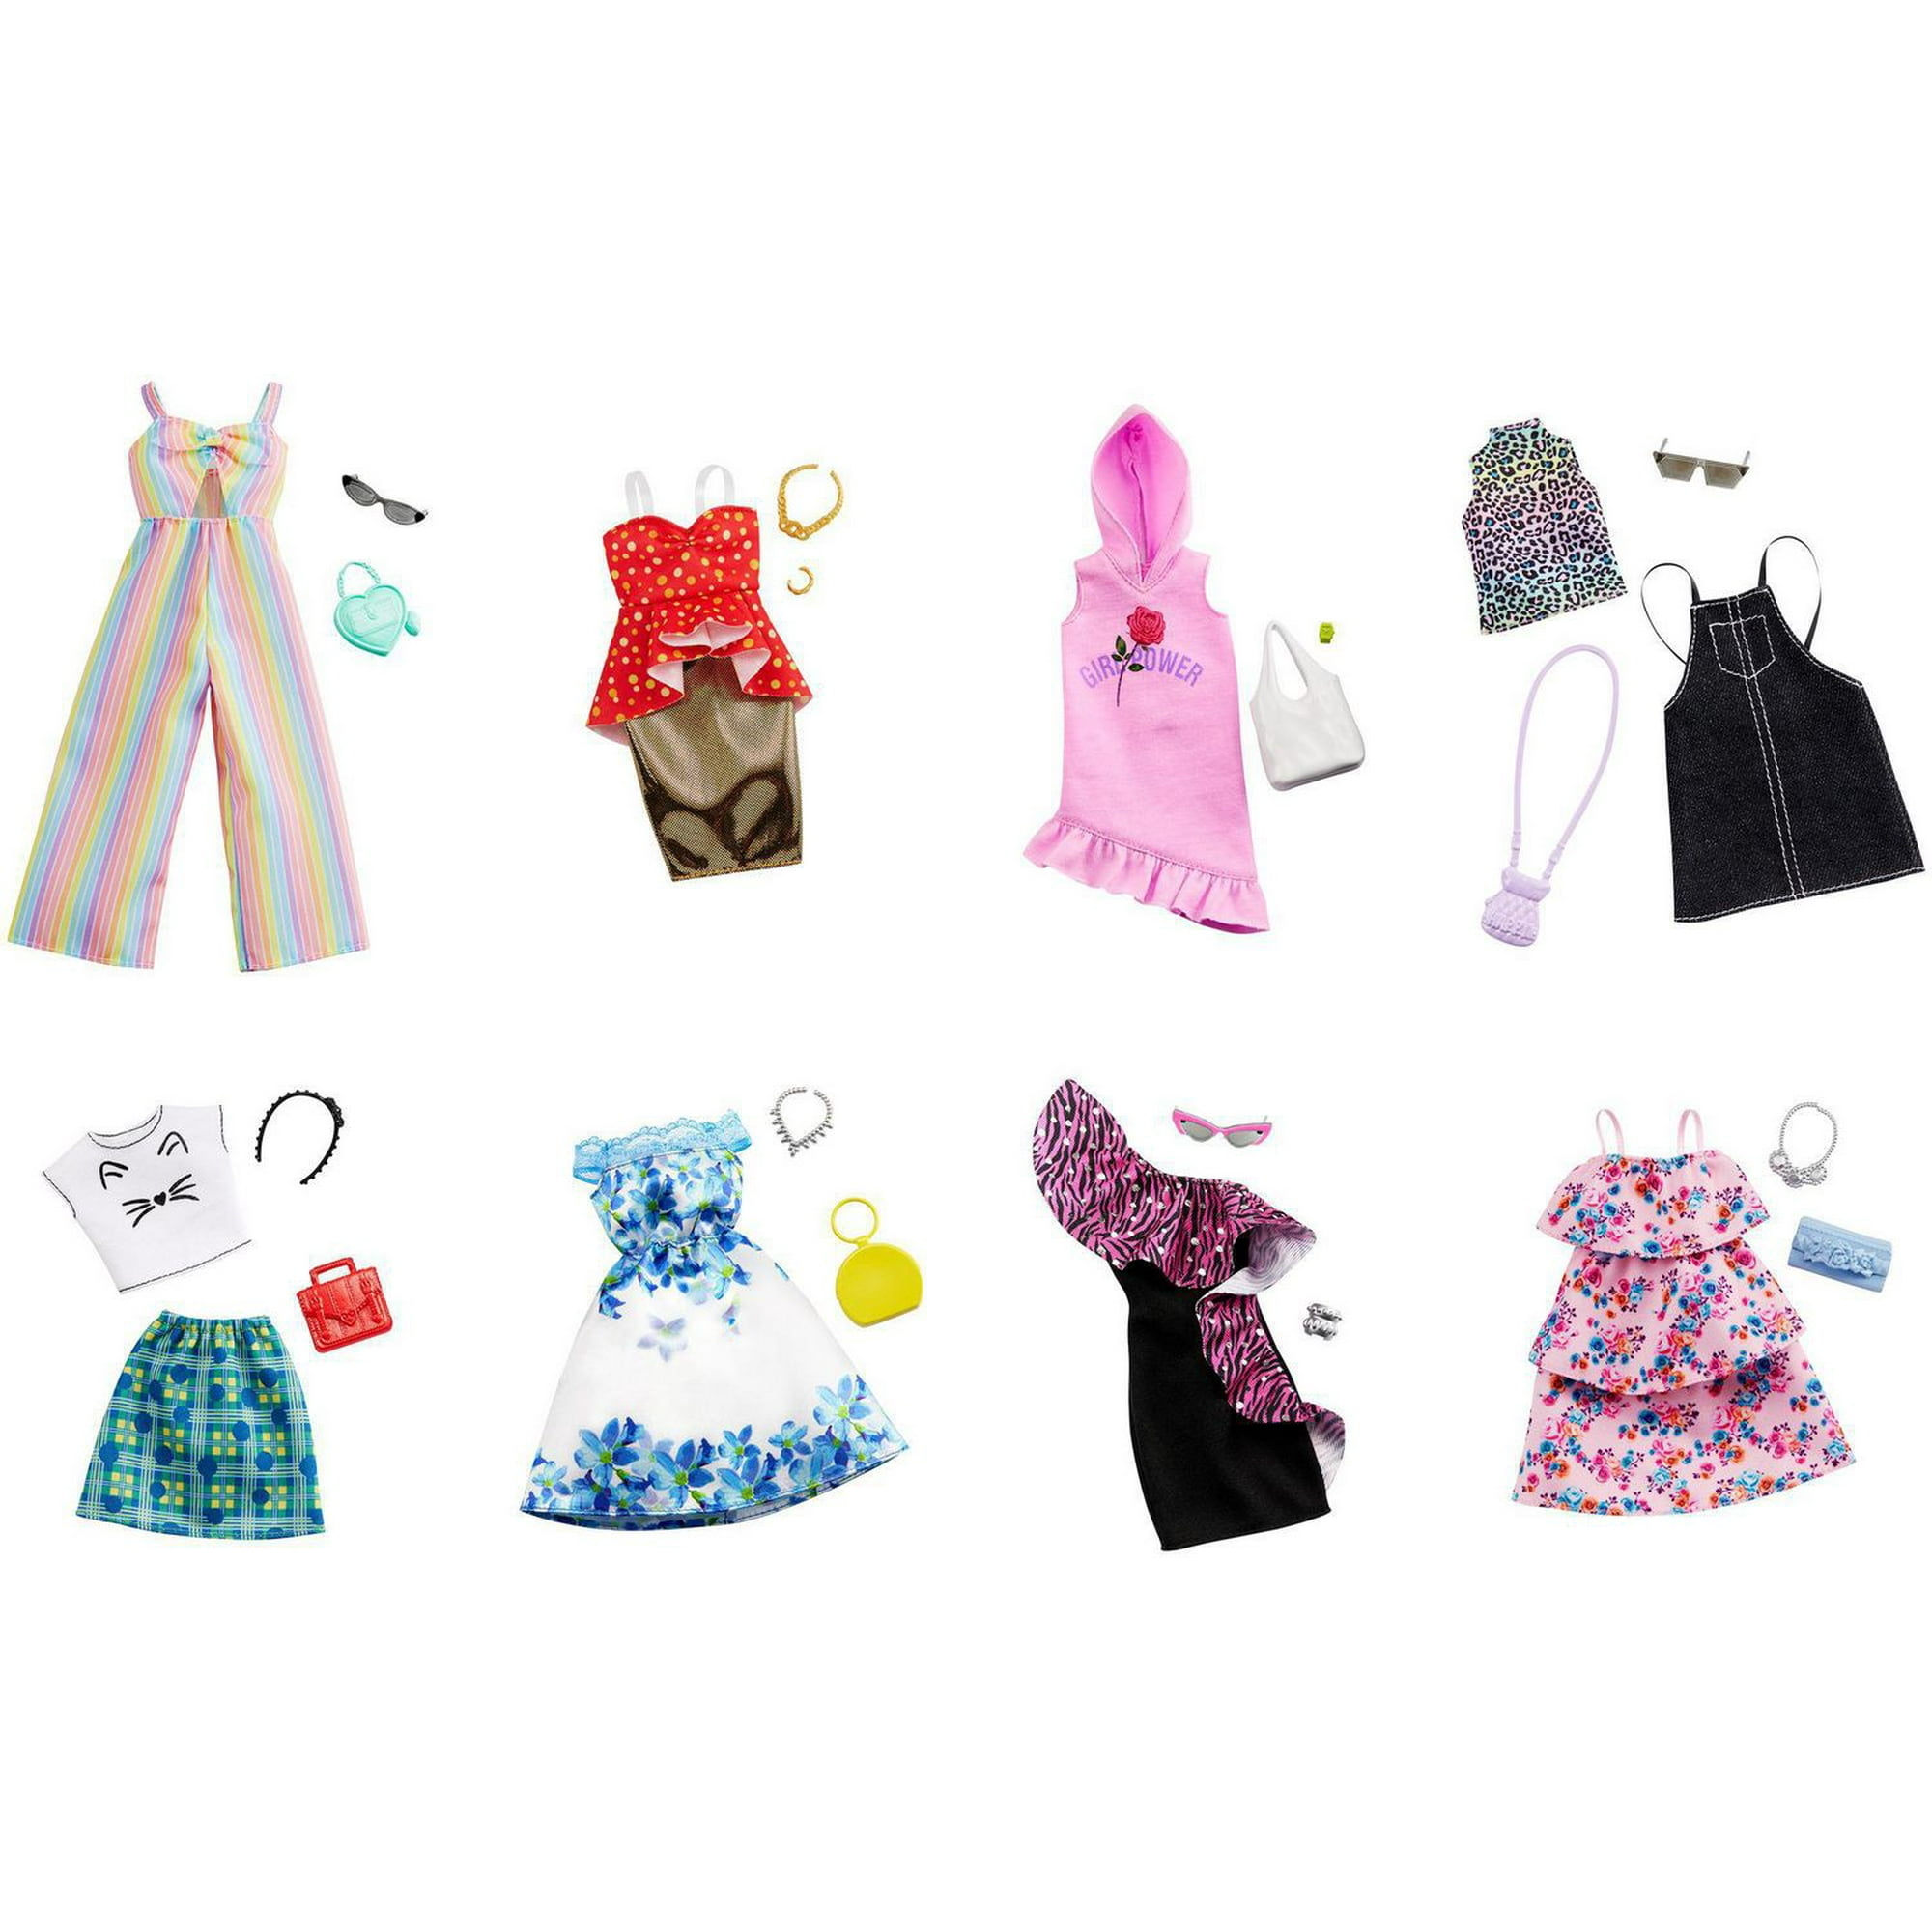 Barbie Doll and Clothing Set with 4 Complete Outfits